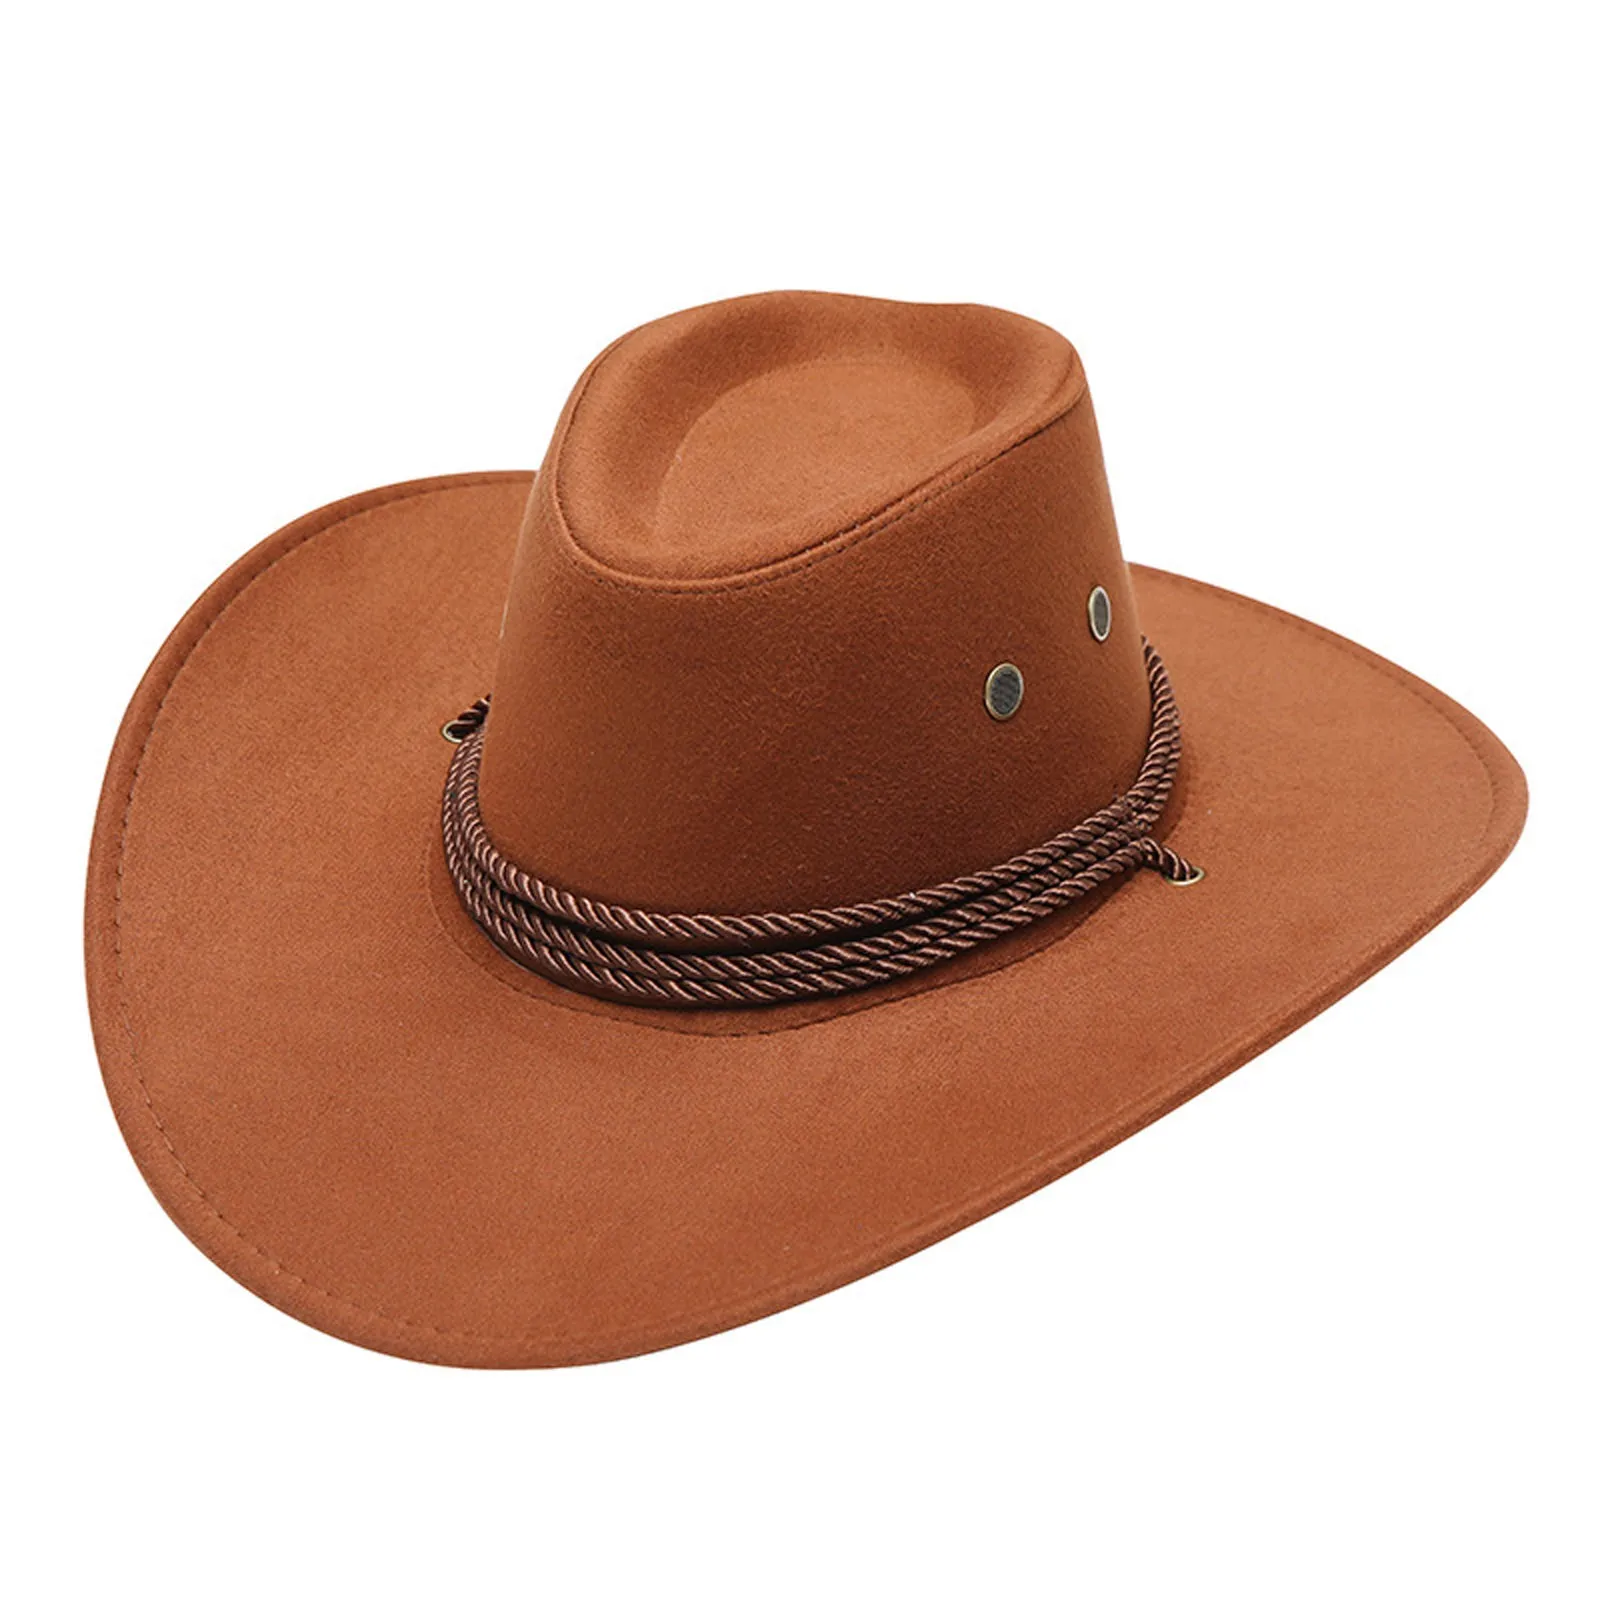 Adult Casual Solid Summer Western Fashion Cowboy Sun Hat Mens Outback Hats with Brims Lost Socks Sign Cowboys Stuff for Women